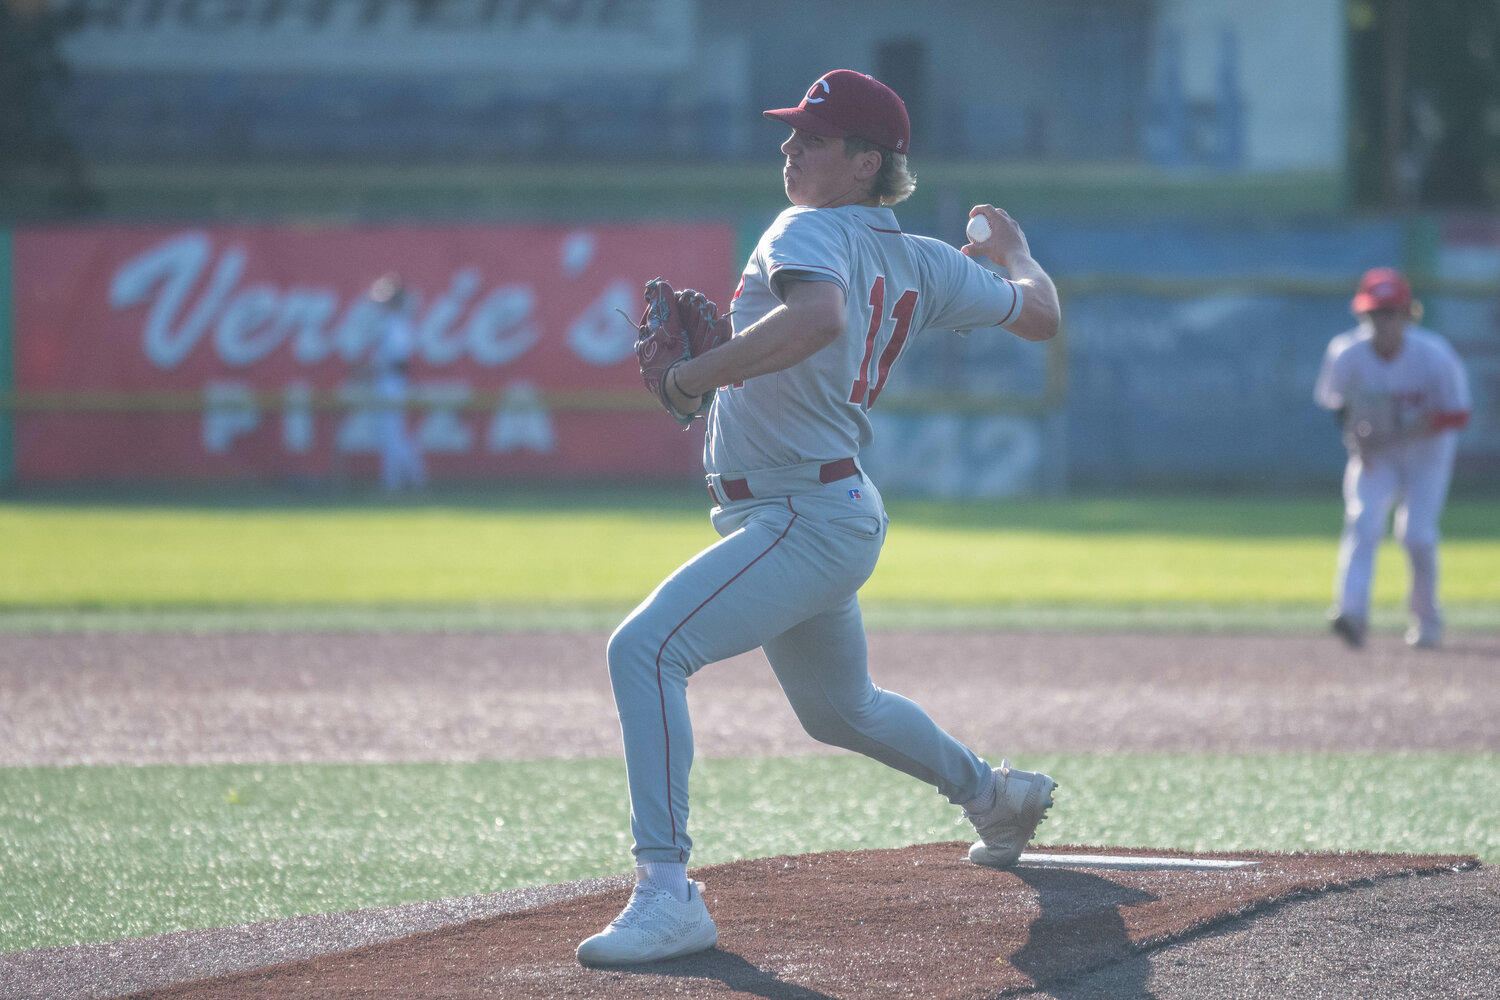 Riggs Westlund of W.F. West throws a pitch during the 45th annual Southwest Washington Senior All-Star Game, May 31 at Story Field in Longview.